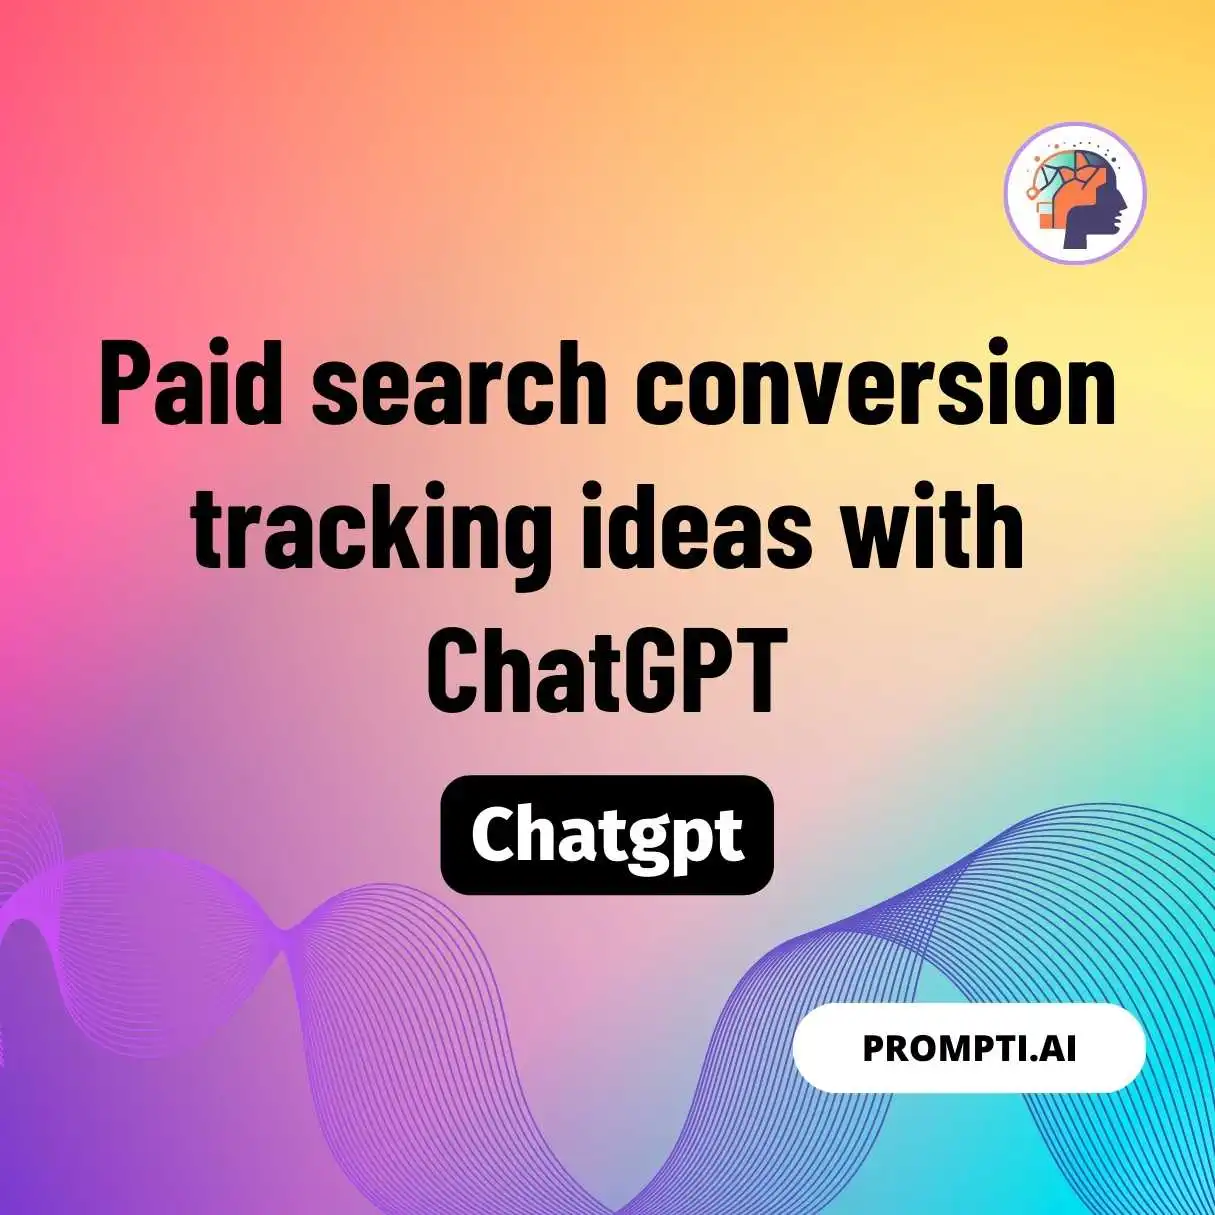 Paid search conversion tracking ideas with ChatGPT